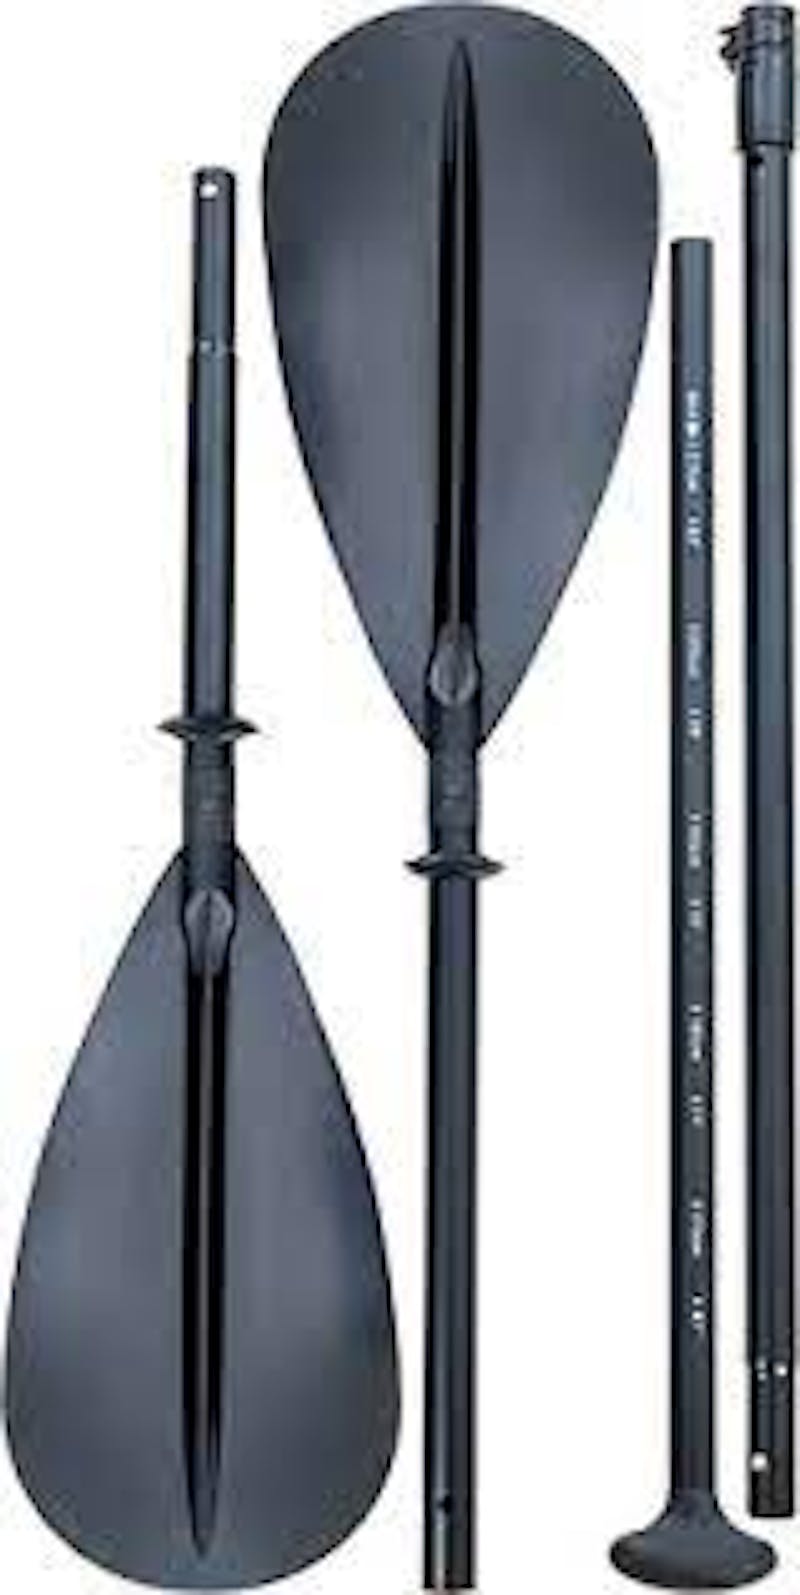 New 2021 F2 4 pieces Kayak Water Sports / Stand Up Paddle